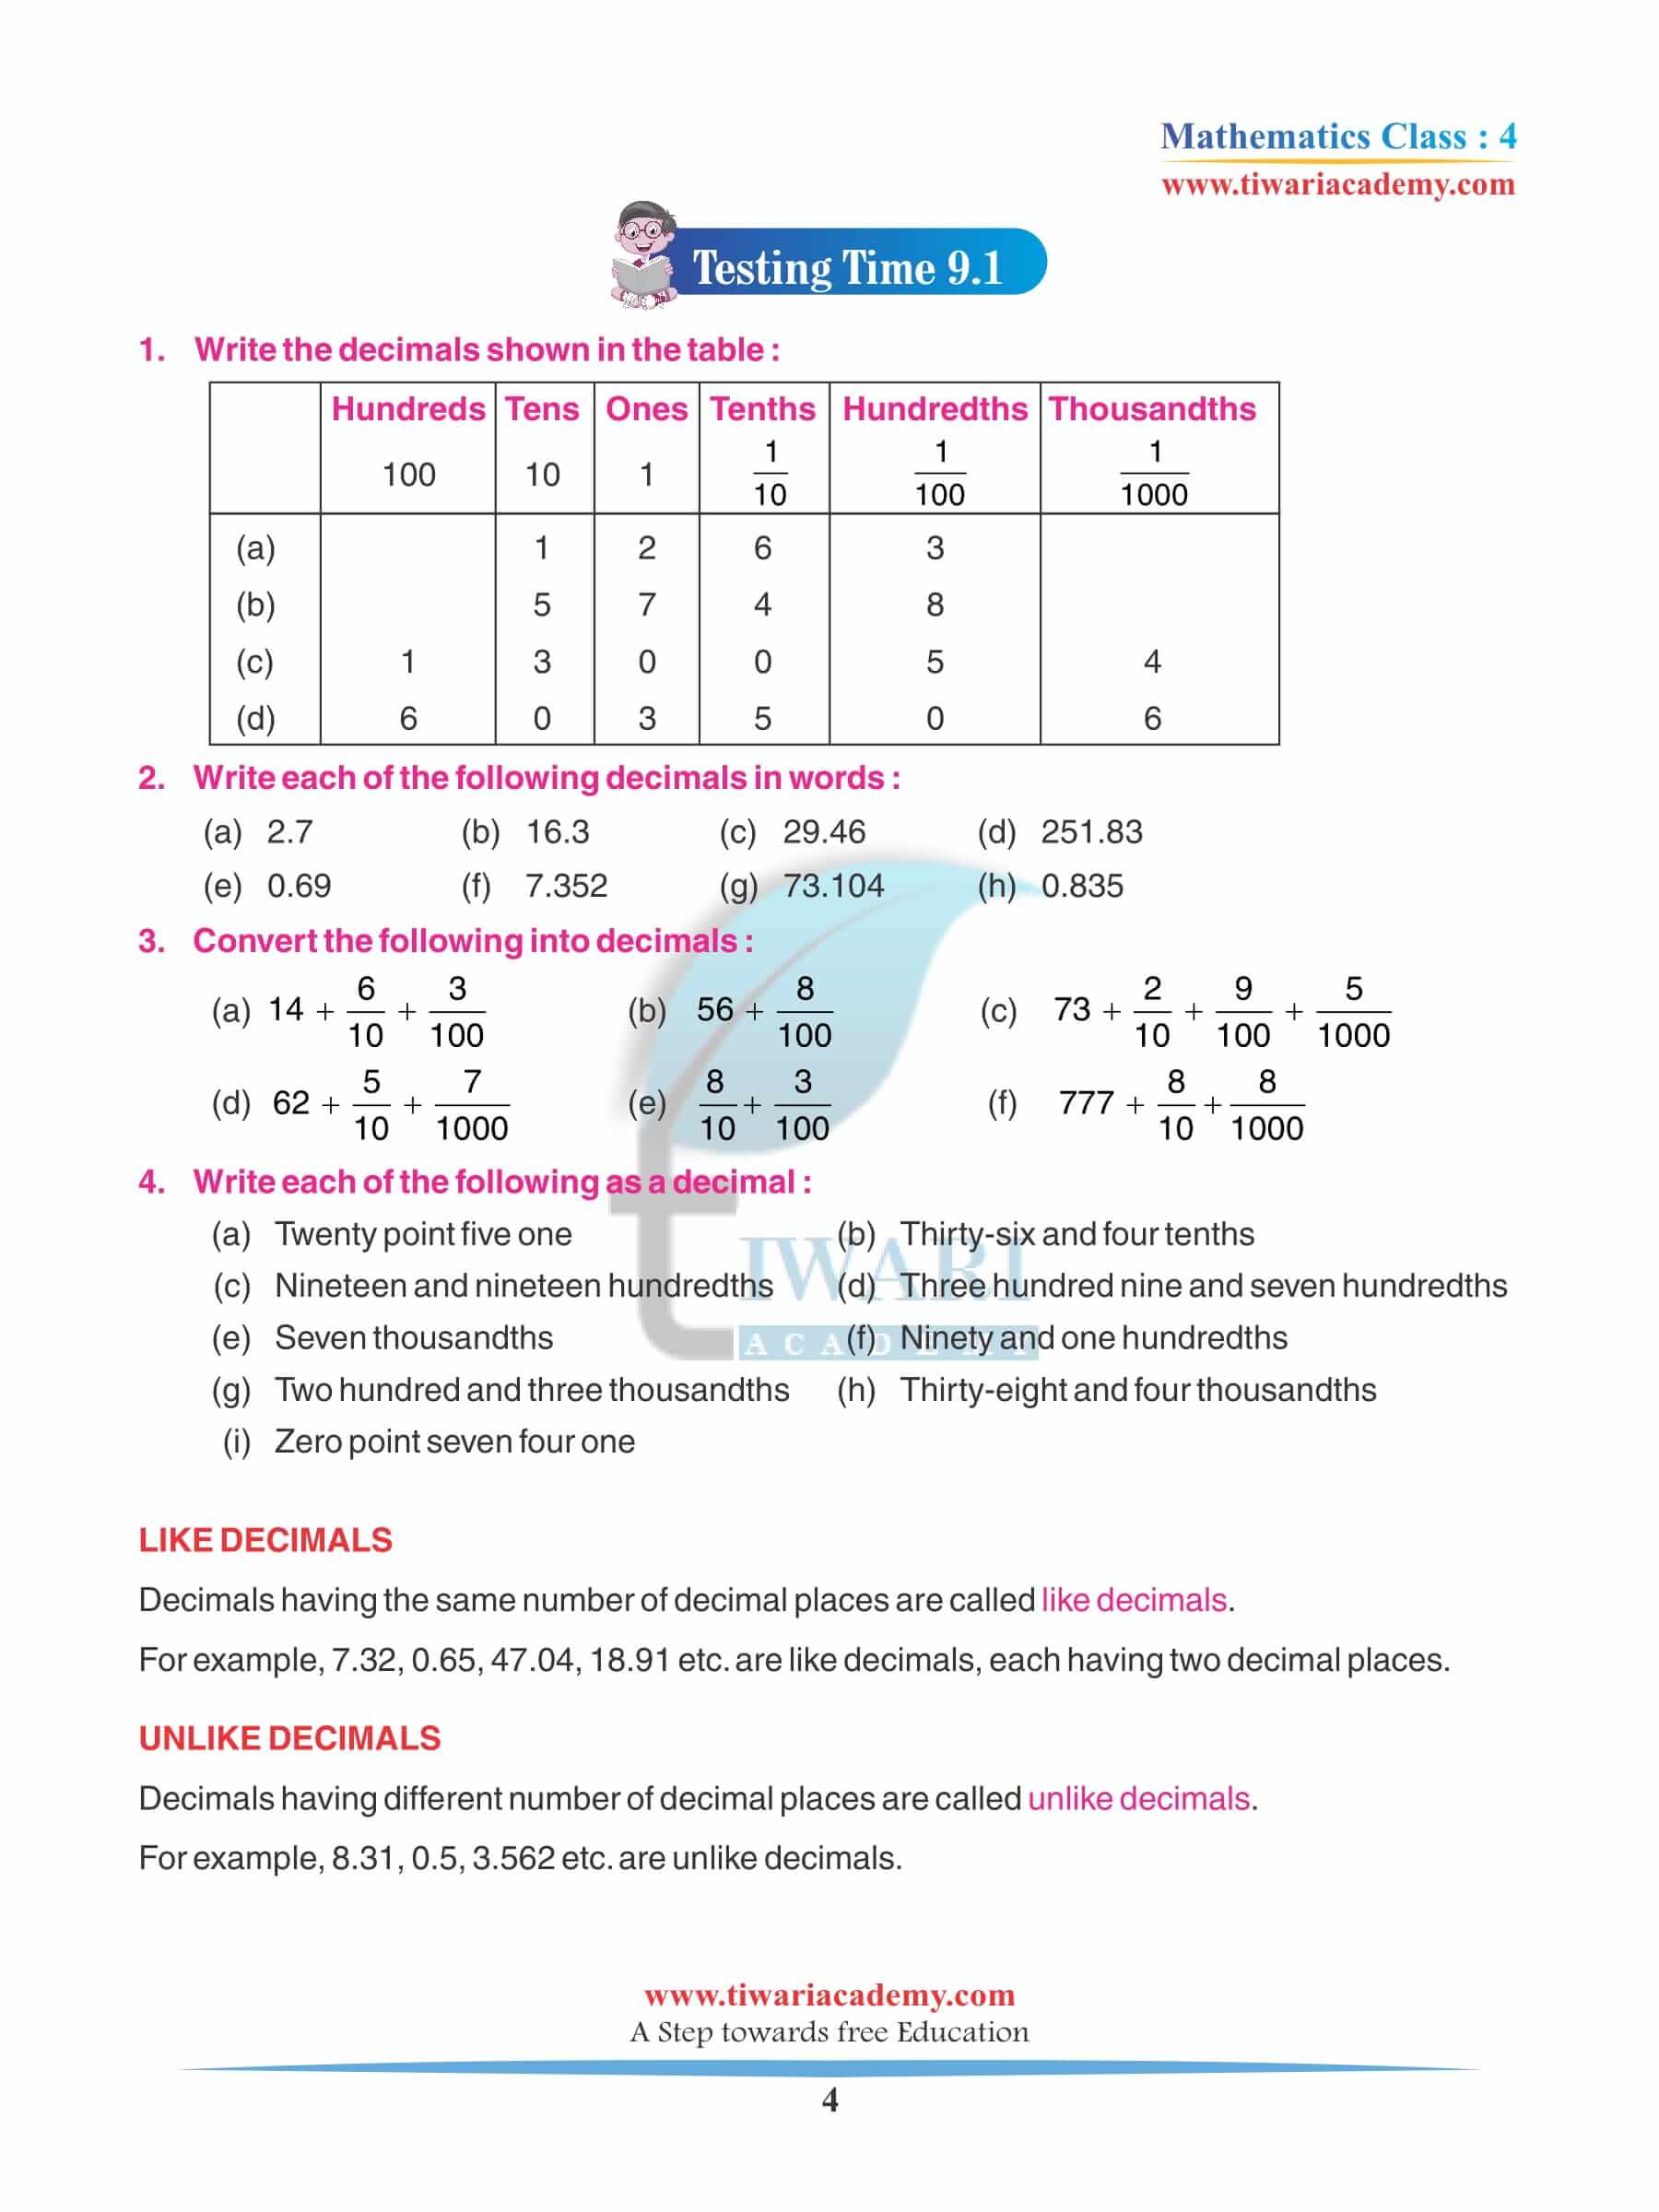 Class 4 Maths Chapter 9 Revision Book free download